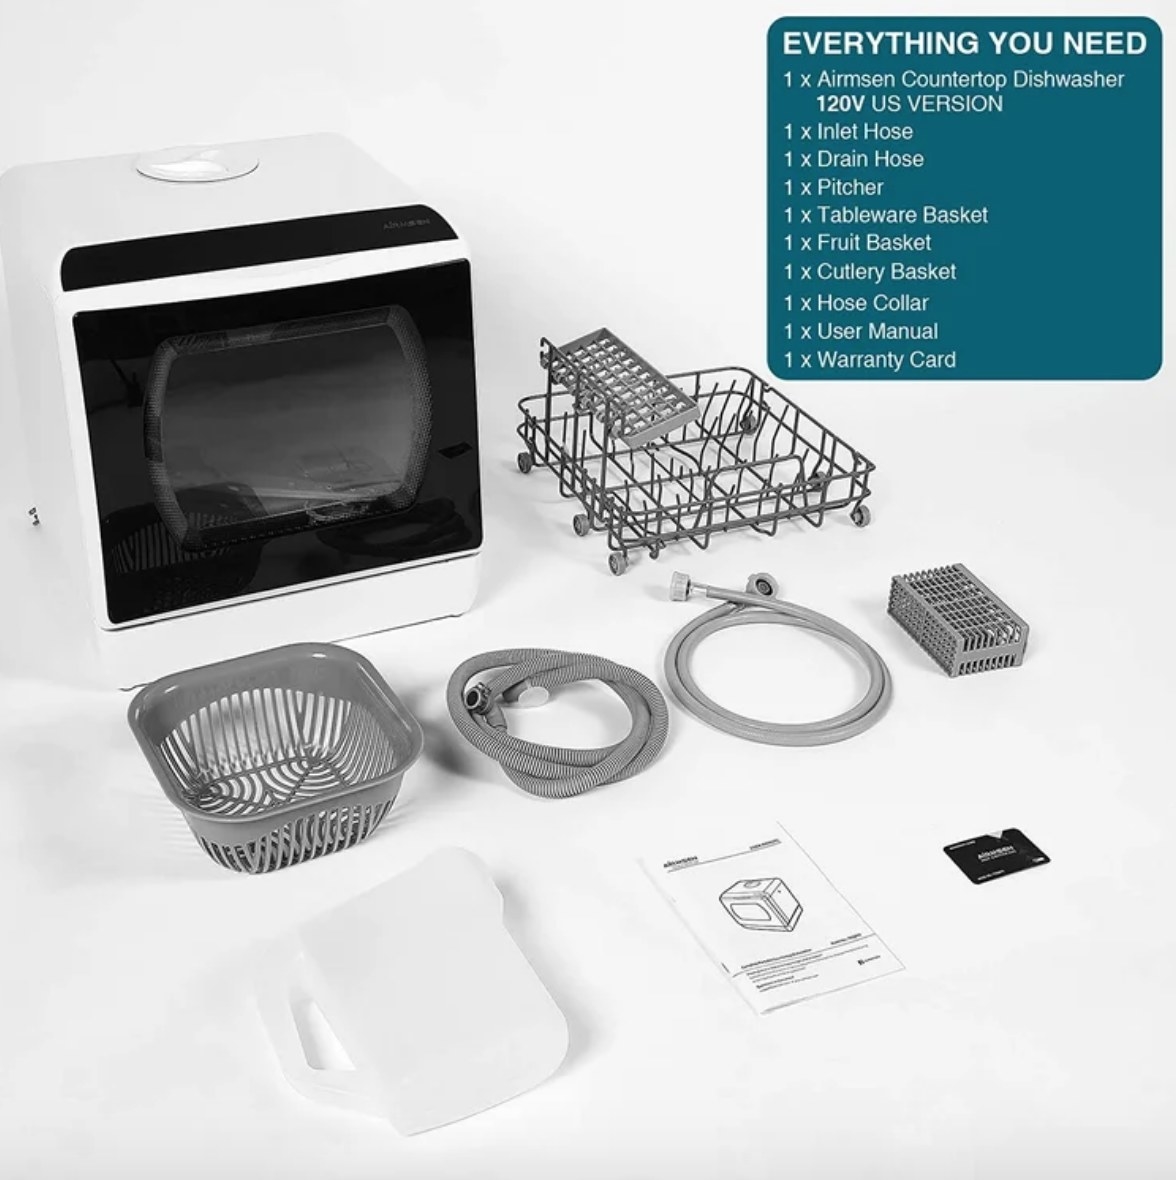 White portable dishwasher and its multiple components including baskets and hoses